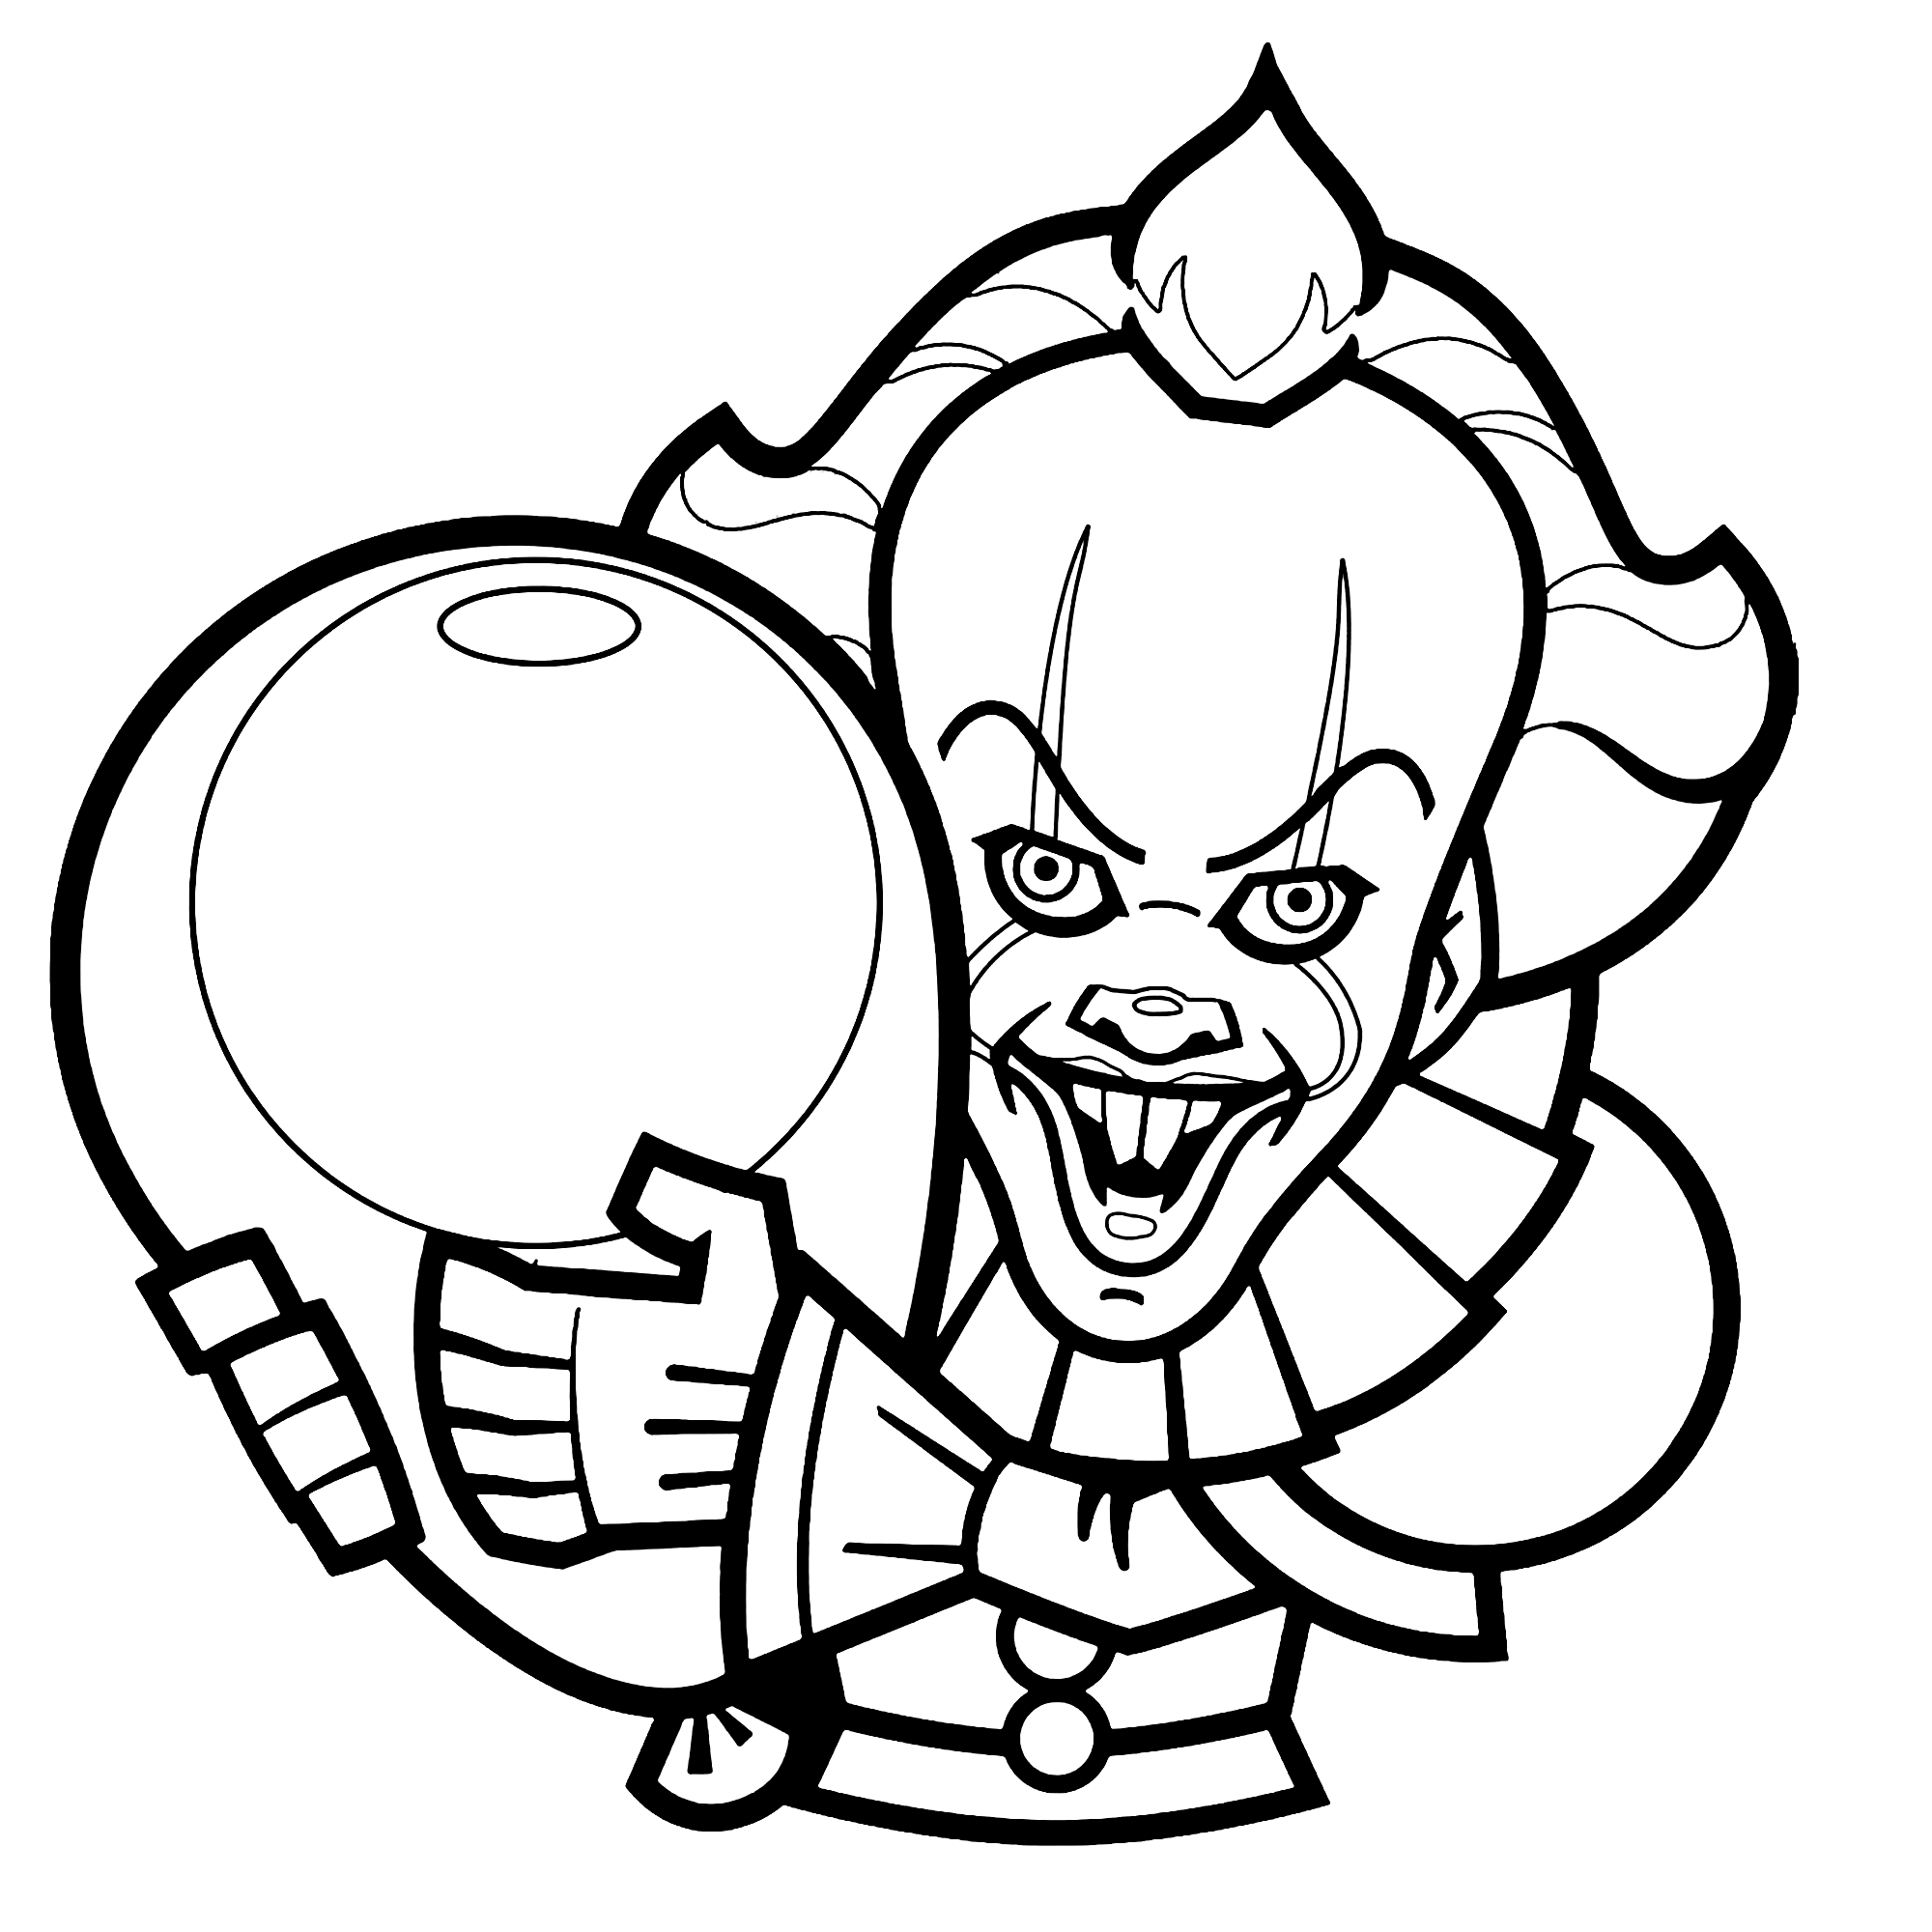 Scary Clown Costume Coloring Page for Halloween